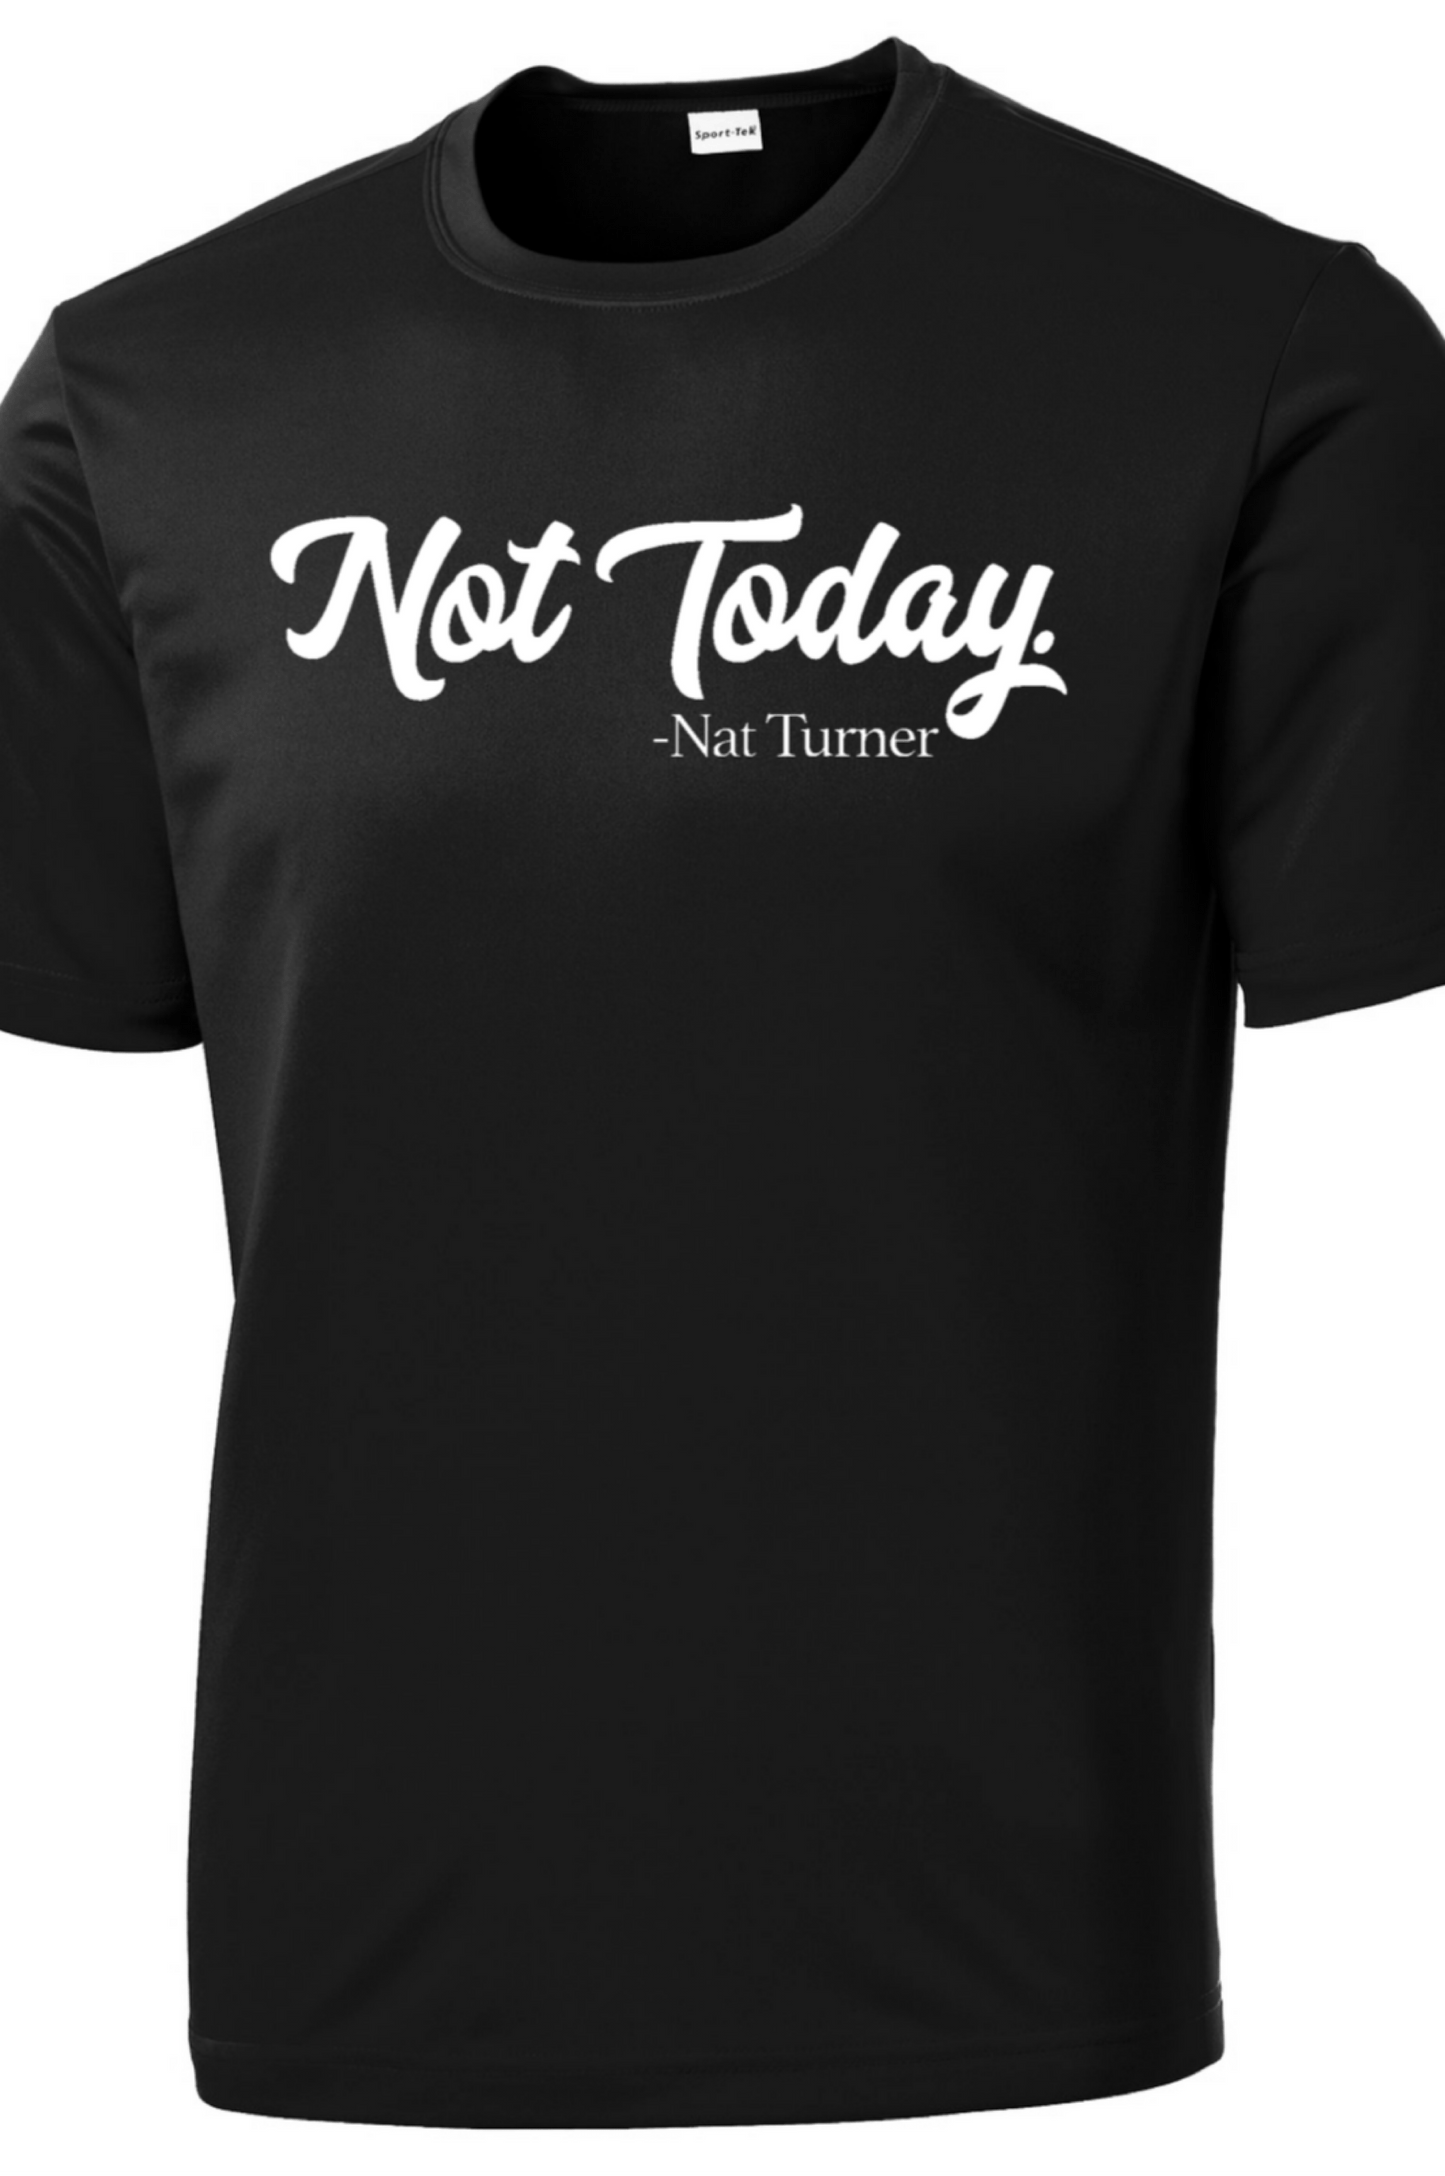 Mens Black Not Today T-shirt for Black History Month 